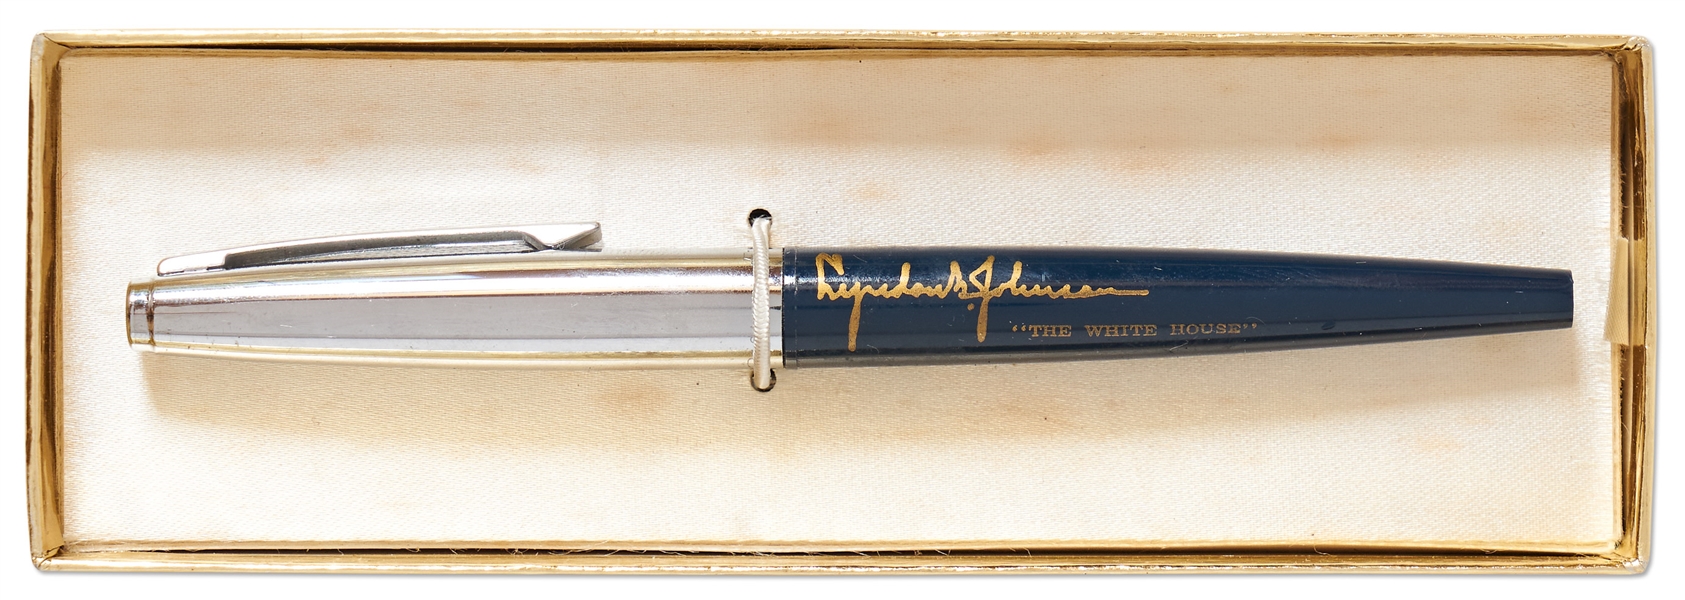 Lyndon Johnson Bill-Signing Pen -- Used as President to Sign Bill Naturalizing Active-Duty Men and Women Serving in Vietnam